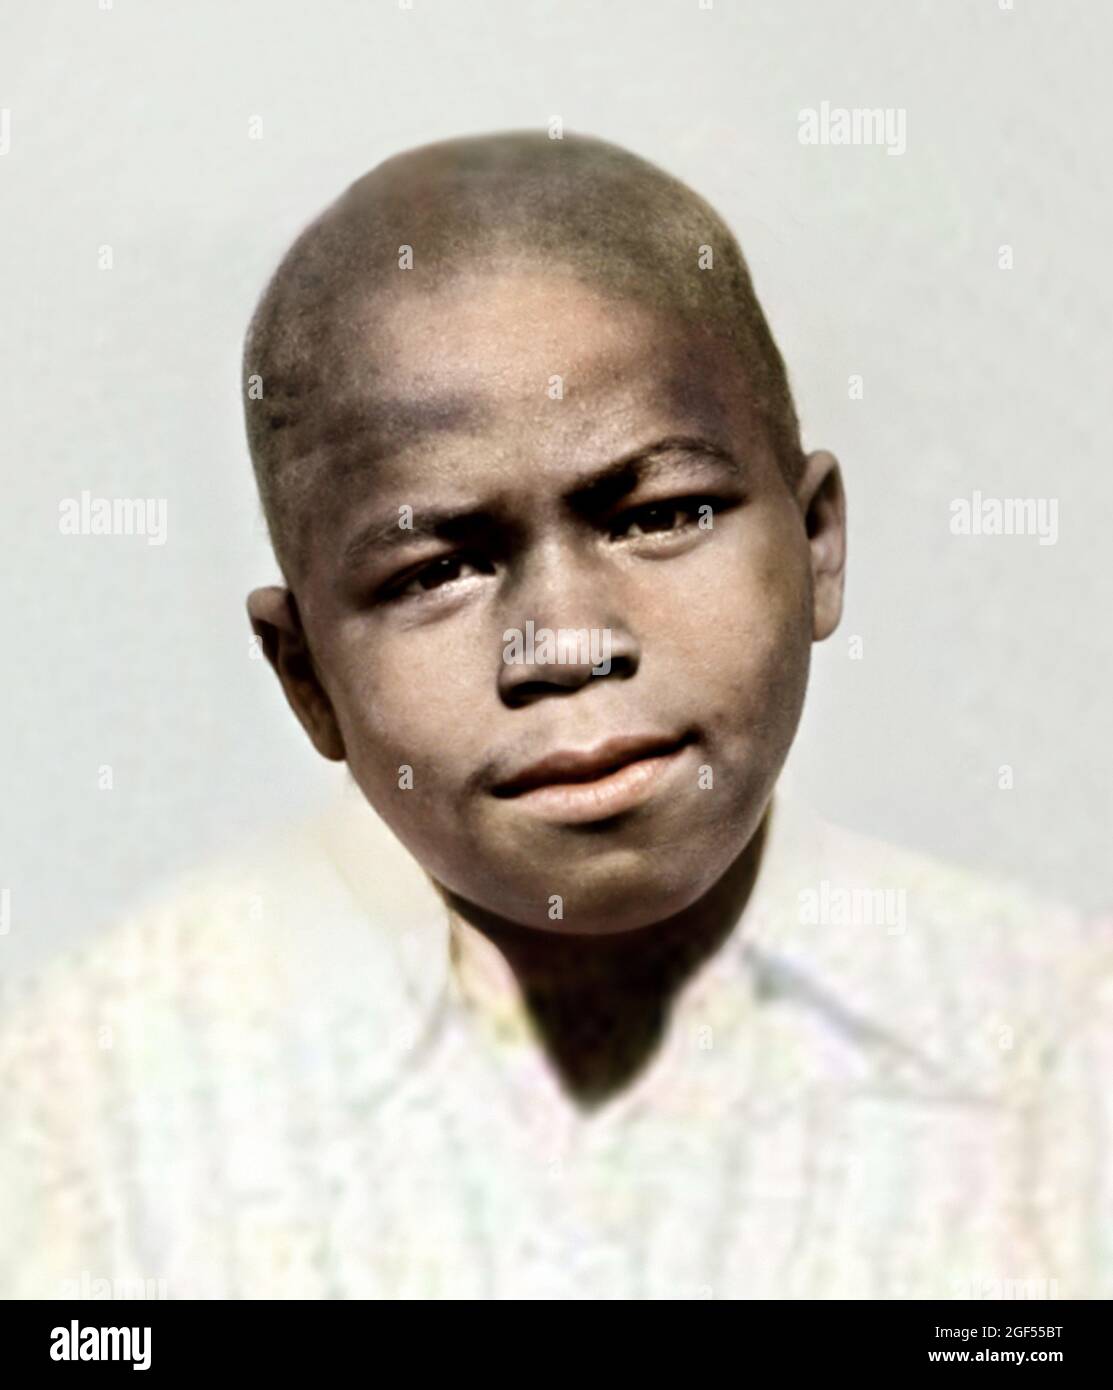 1936 ca, USA : The most celebrated american King of Soul Music JAMES BROWN ( 1933 - 2006 ) when was a young boy aged 10 . Singer , songwriter , dancer , musician , record producer  and bandleader . Undentified photographer. - MUSIC - MUSICA SOUL - HISTORY - FOTO STORICHE - when was a child - children - celebrities celebrity - celebrità personaggi famosi da bambini - bambino - children - infanzia - childhood --- ARCHIVIO GBB Stock Photo